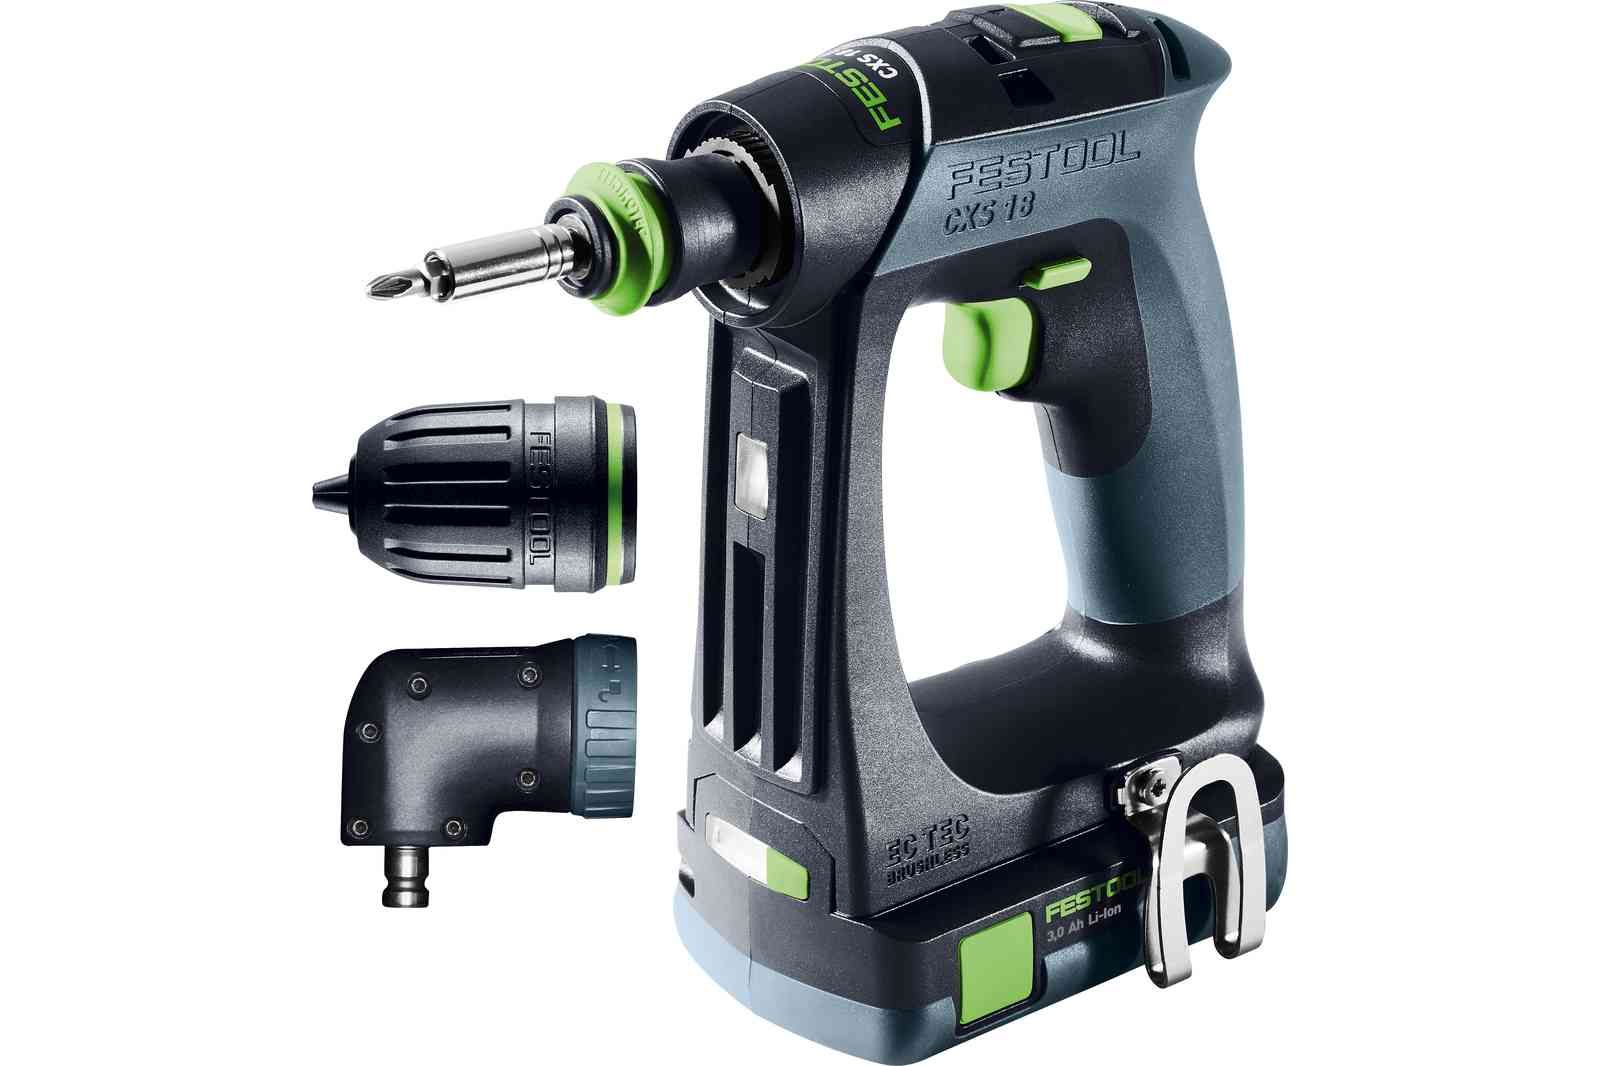 CXS 18V Cordless Compact 2 Speed Drill 3.0Ah Set & Angle Attachment in Systainer - 576884 by Festool